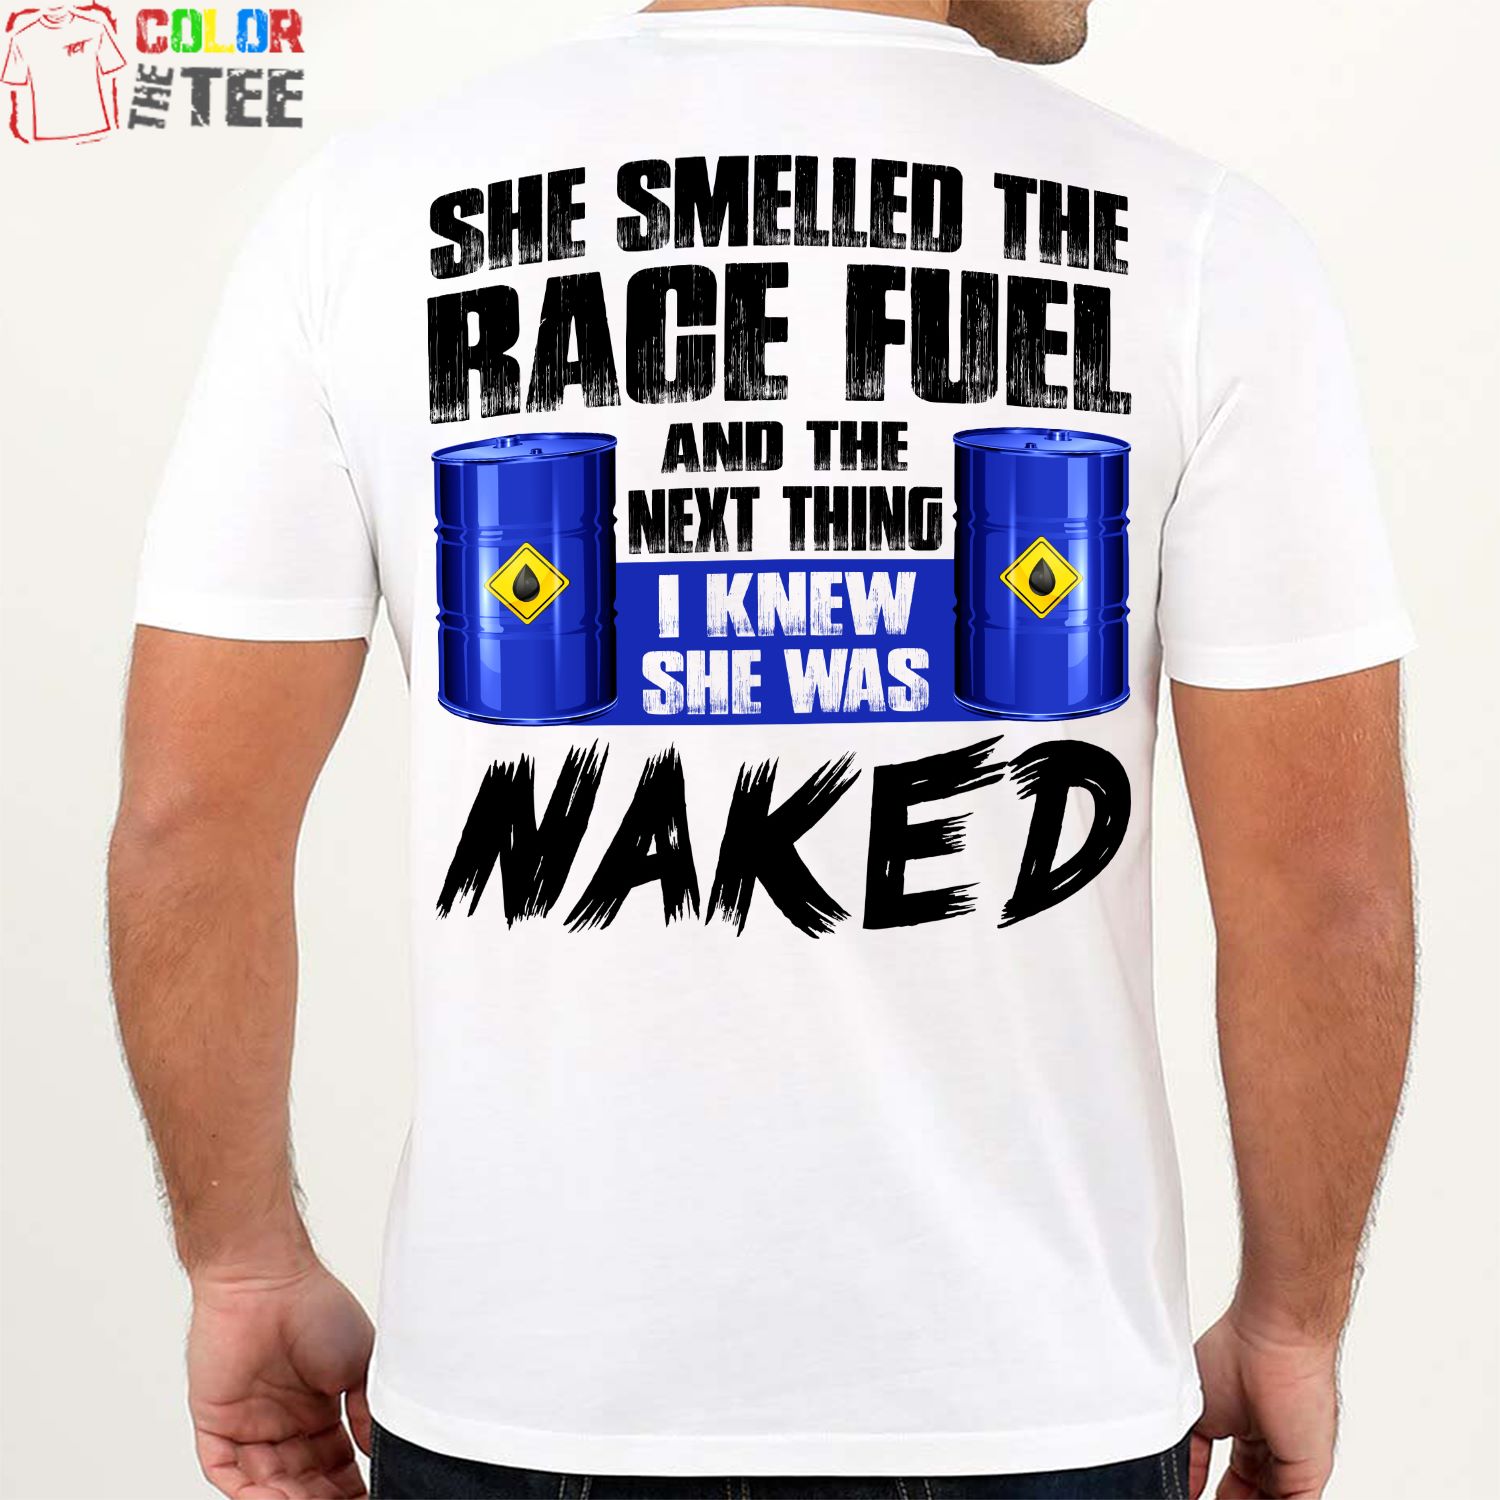 She smelled the race fuel and the next thing I knew she was naked - Girl love racing